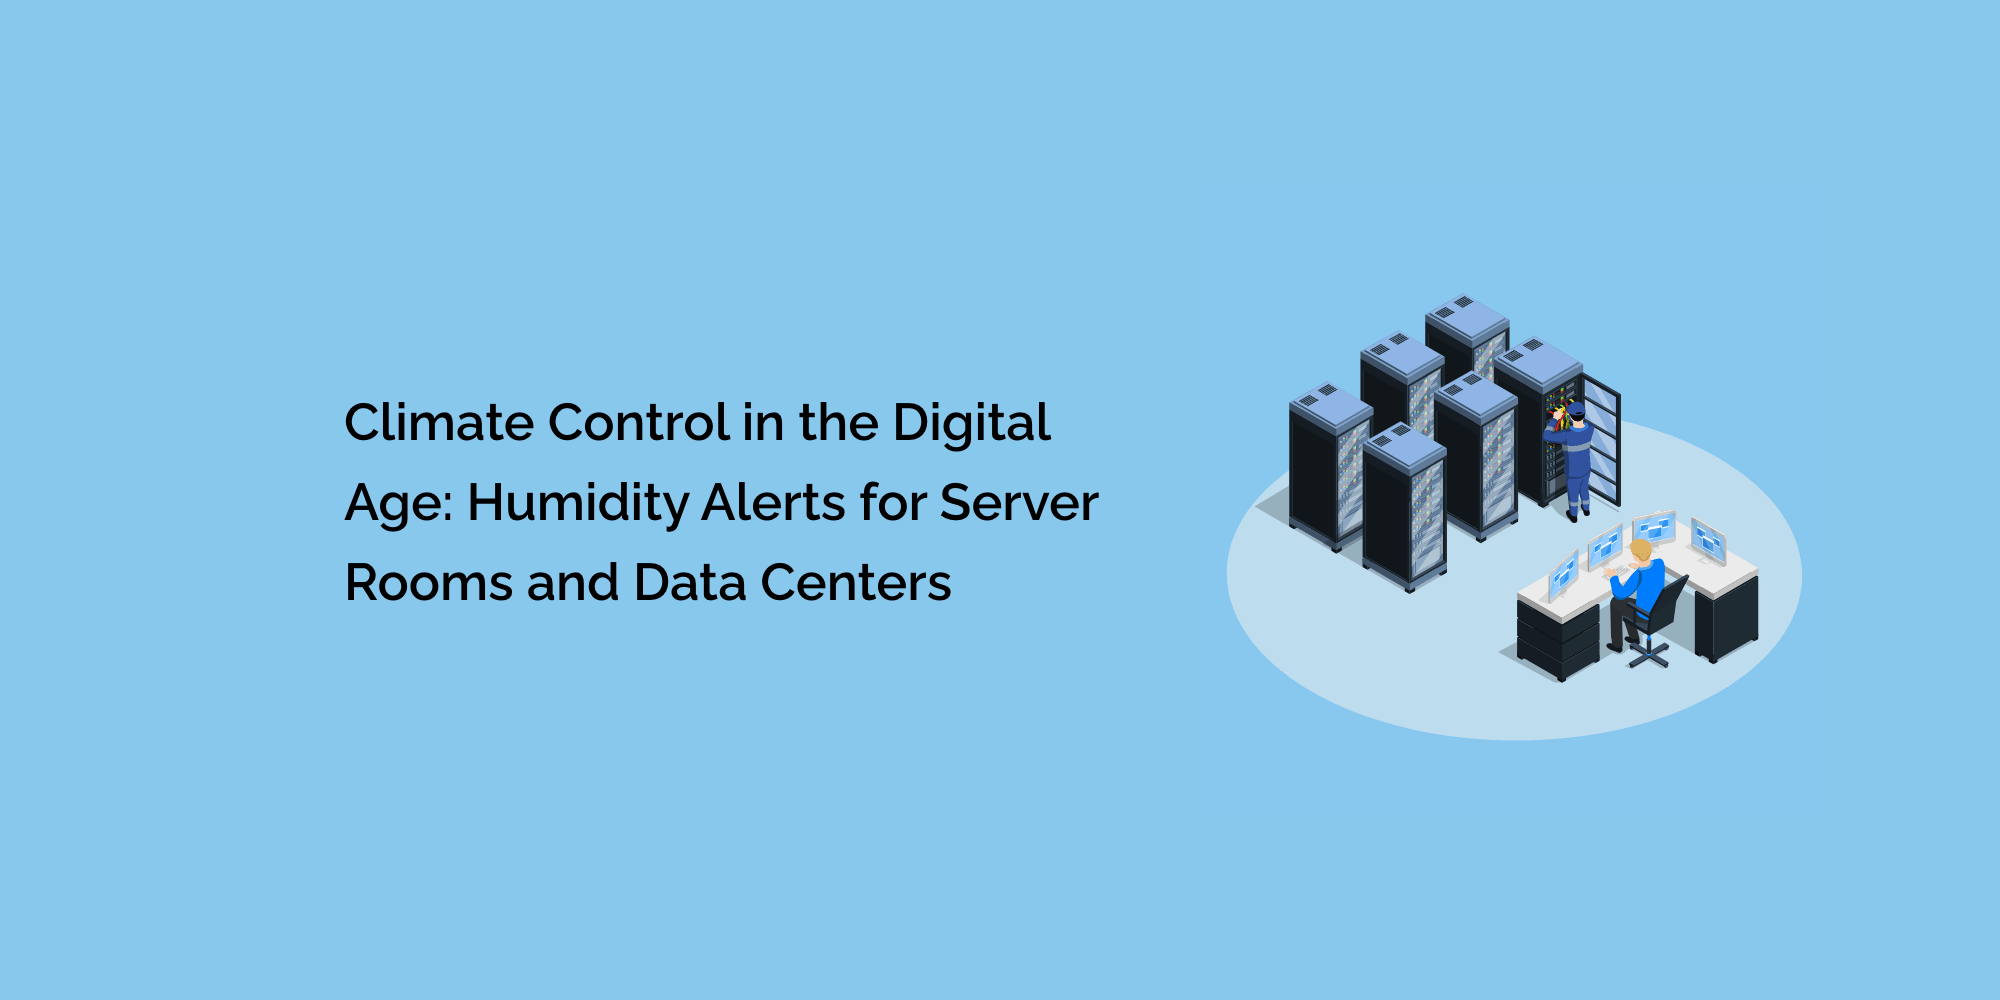 Climate Control in the Digital Age: Humidity Alerts for Server Rooms and Data Centers